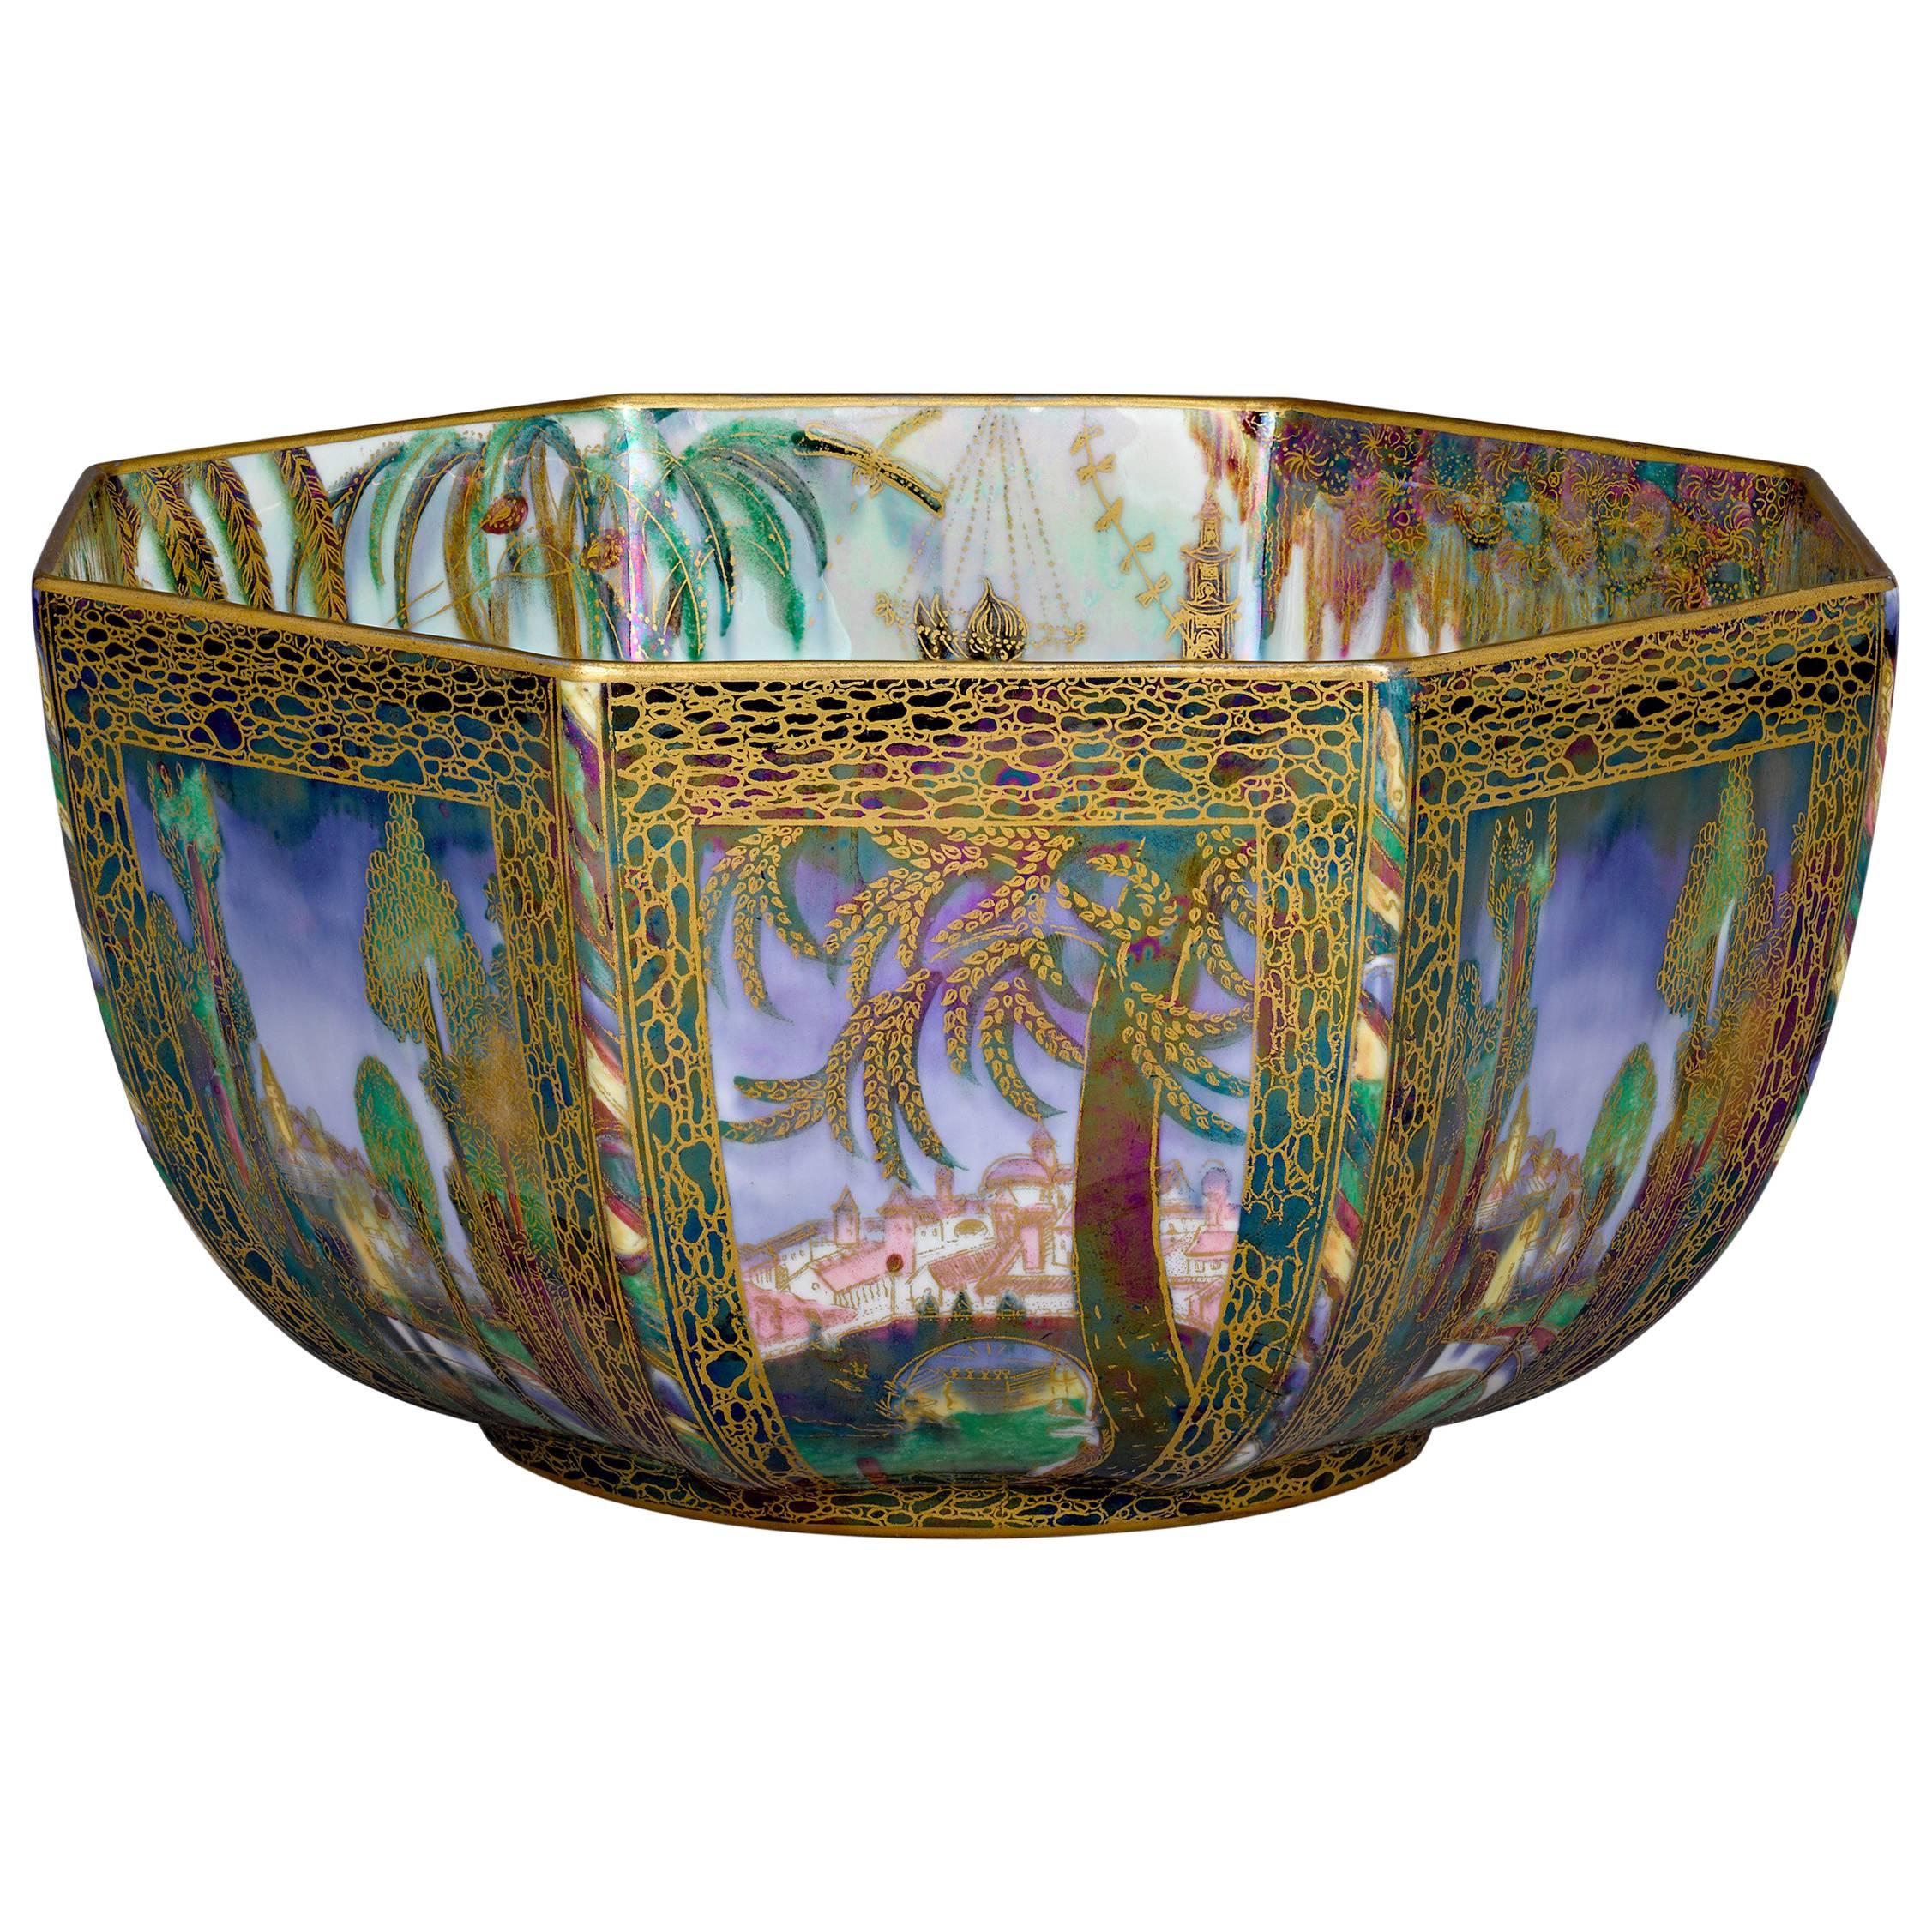 Fairyland Lustre Castle on a Road Bowl by Wedgwood